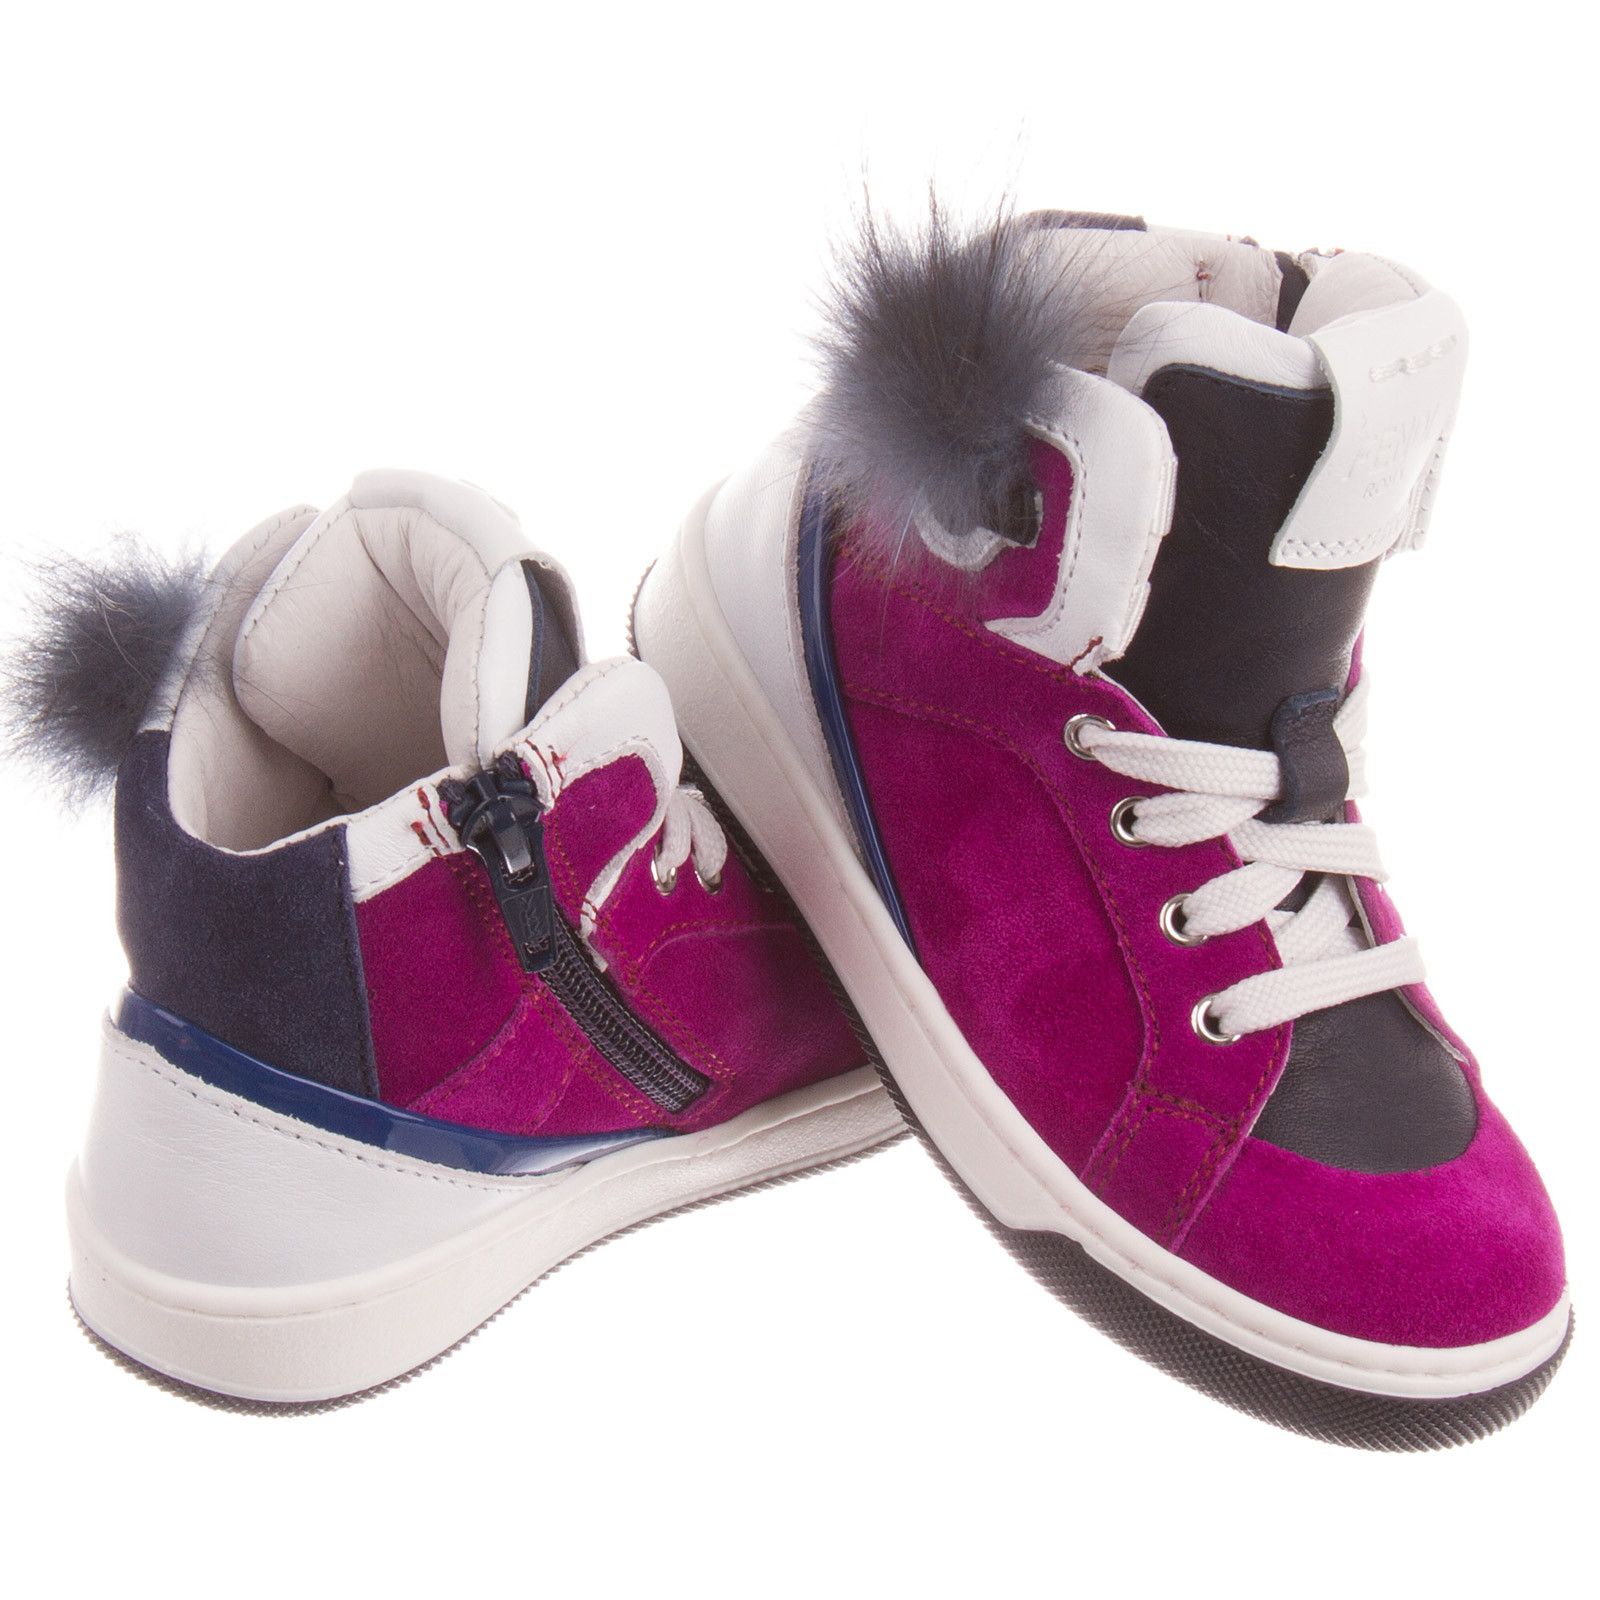 Boys&Girls Purple Suede High-top Trainers With Fur - CÉMAROSE | Children's Fashion Store - 3